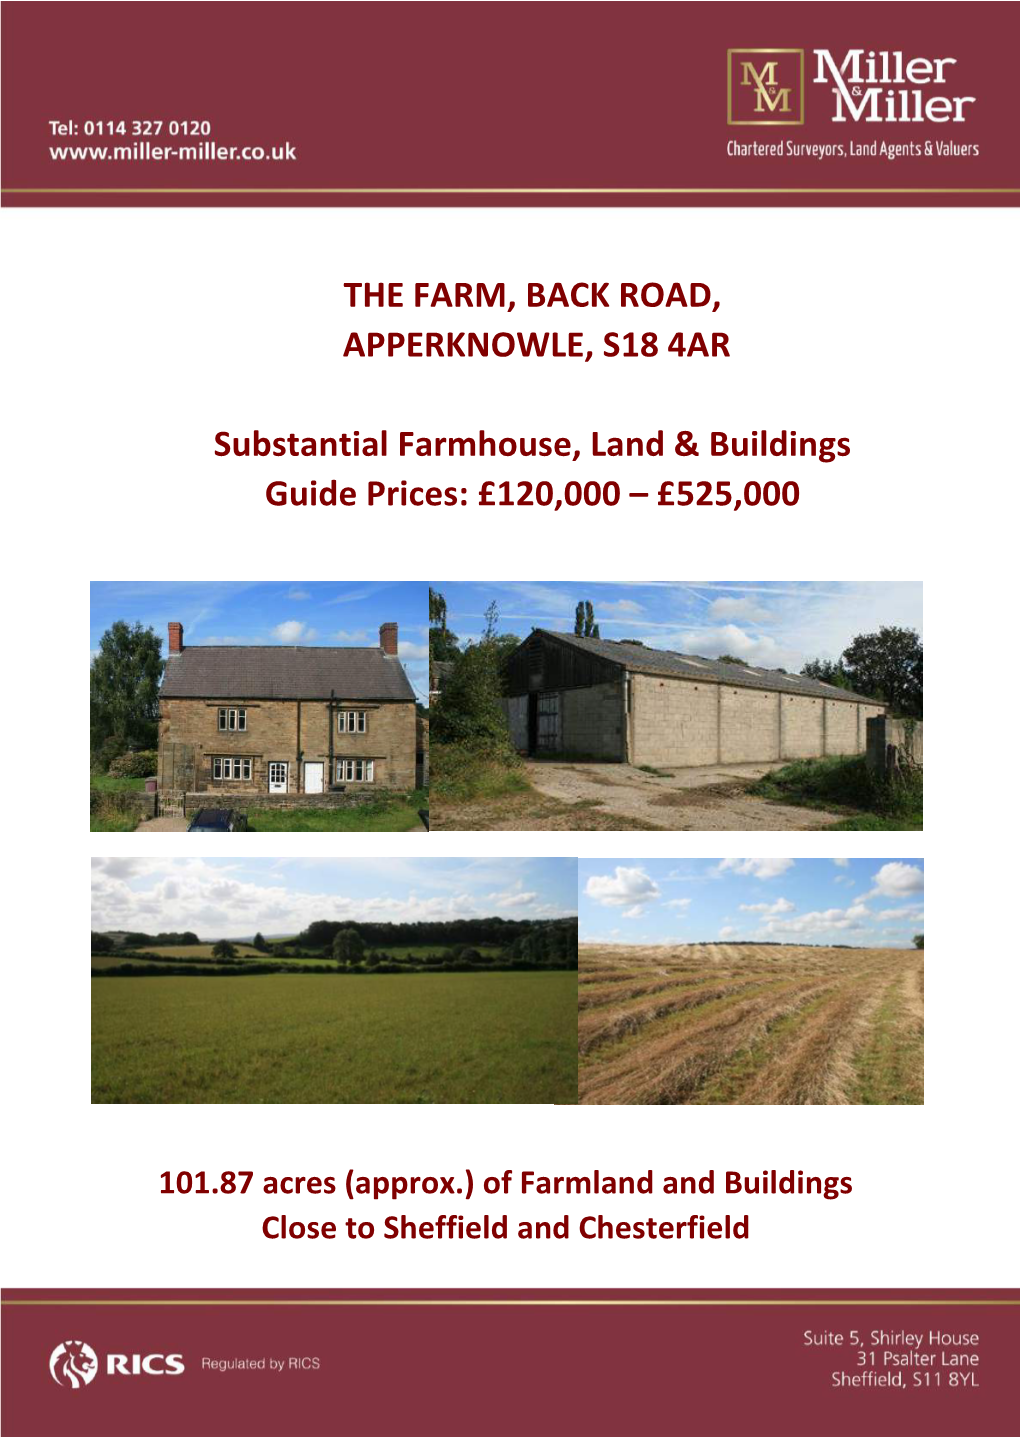 The Farm, Back Road, Apperknowle, S18 4Ar